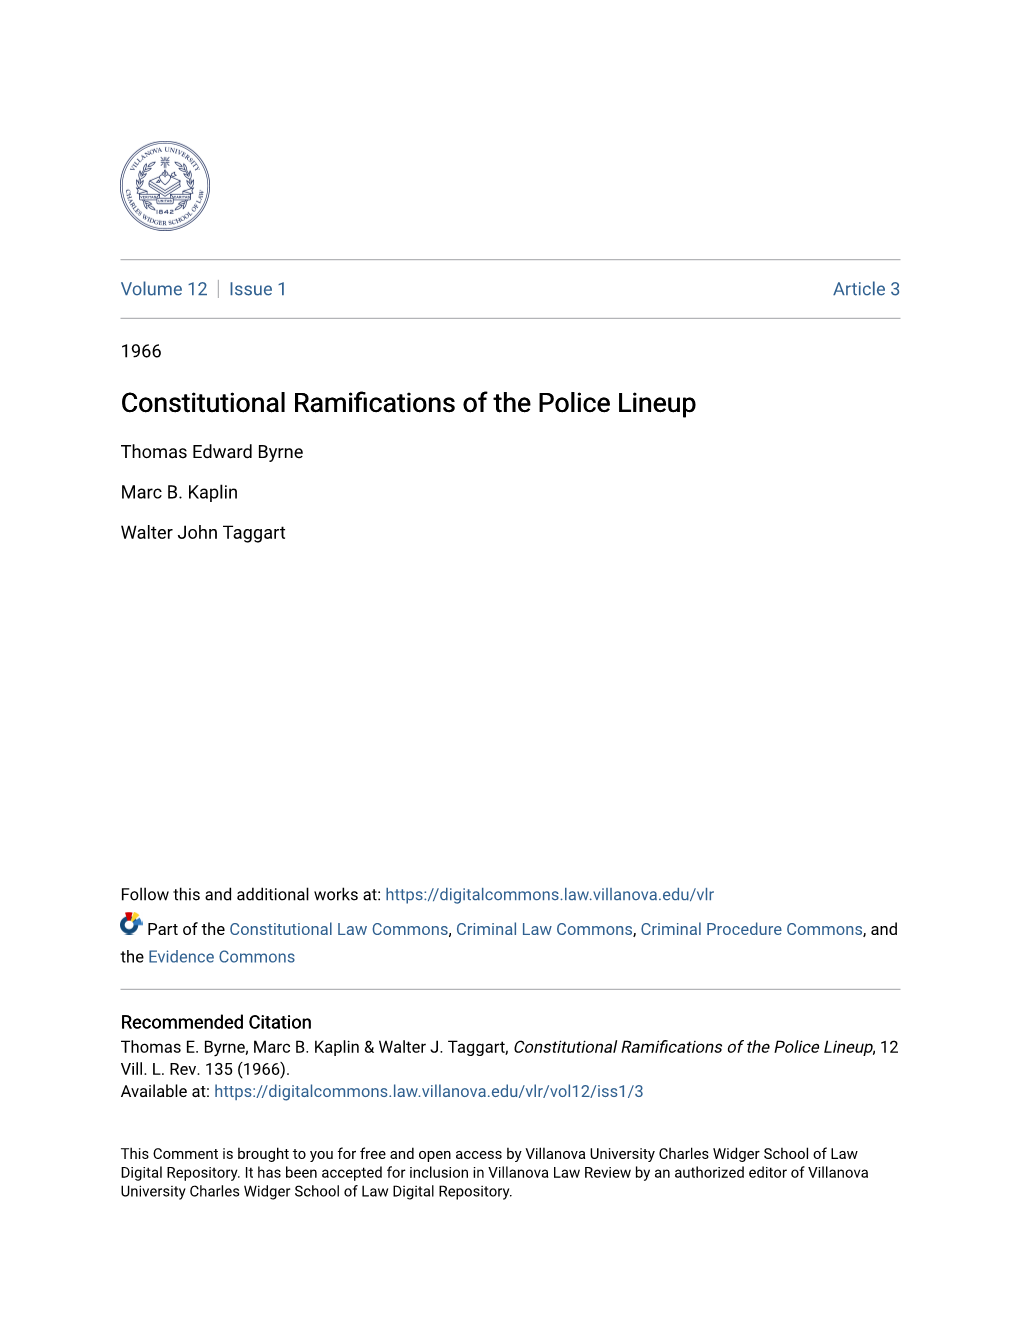 Constitutional Ramifications of the Police Lineup